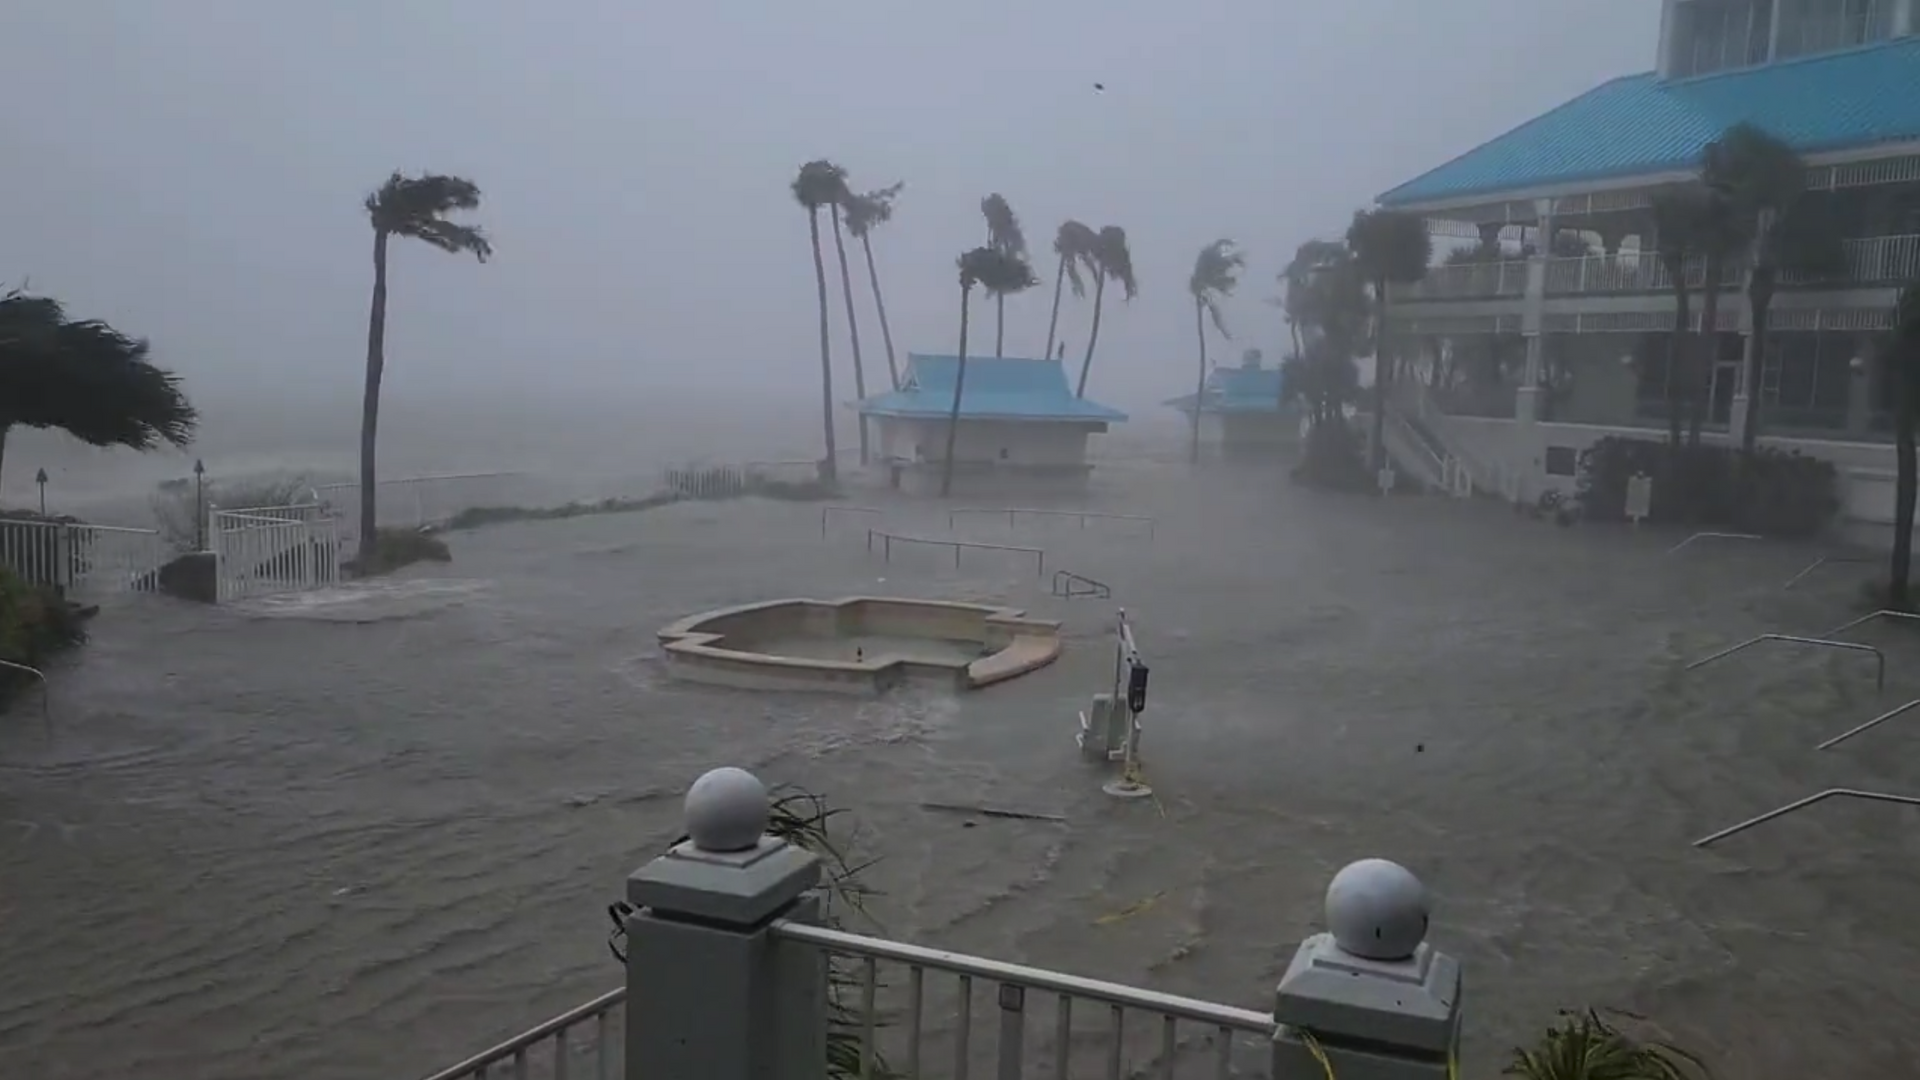 Hurricane Ian has officially made landfall in Florida as a Category 4 storm, the US National Hurricane Center has confirmed. - Sputnik International, 1920, 29.09.2022